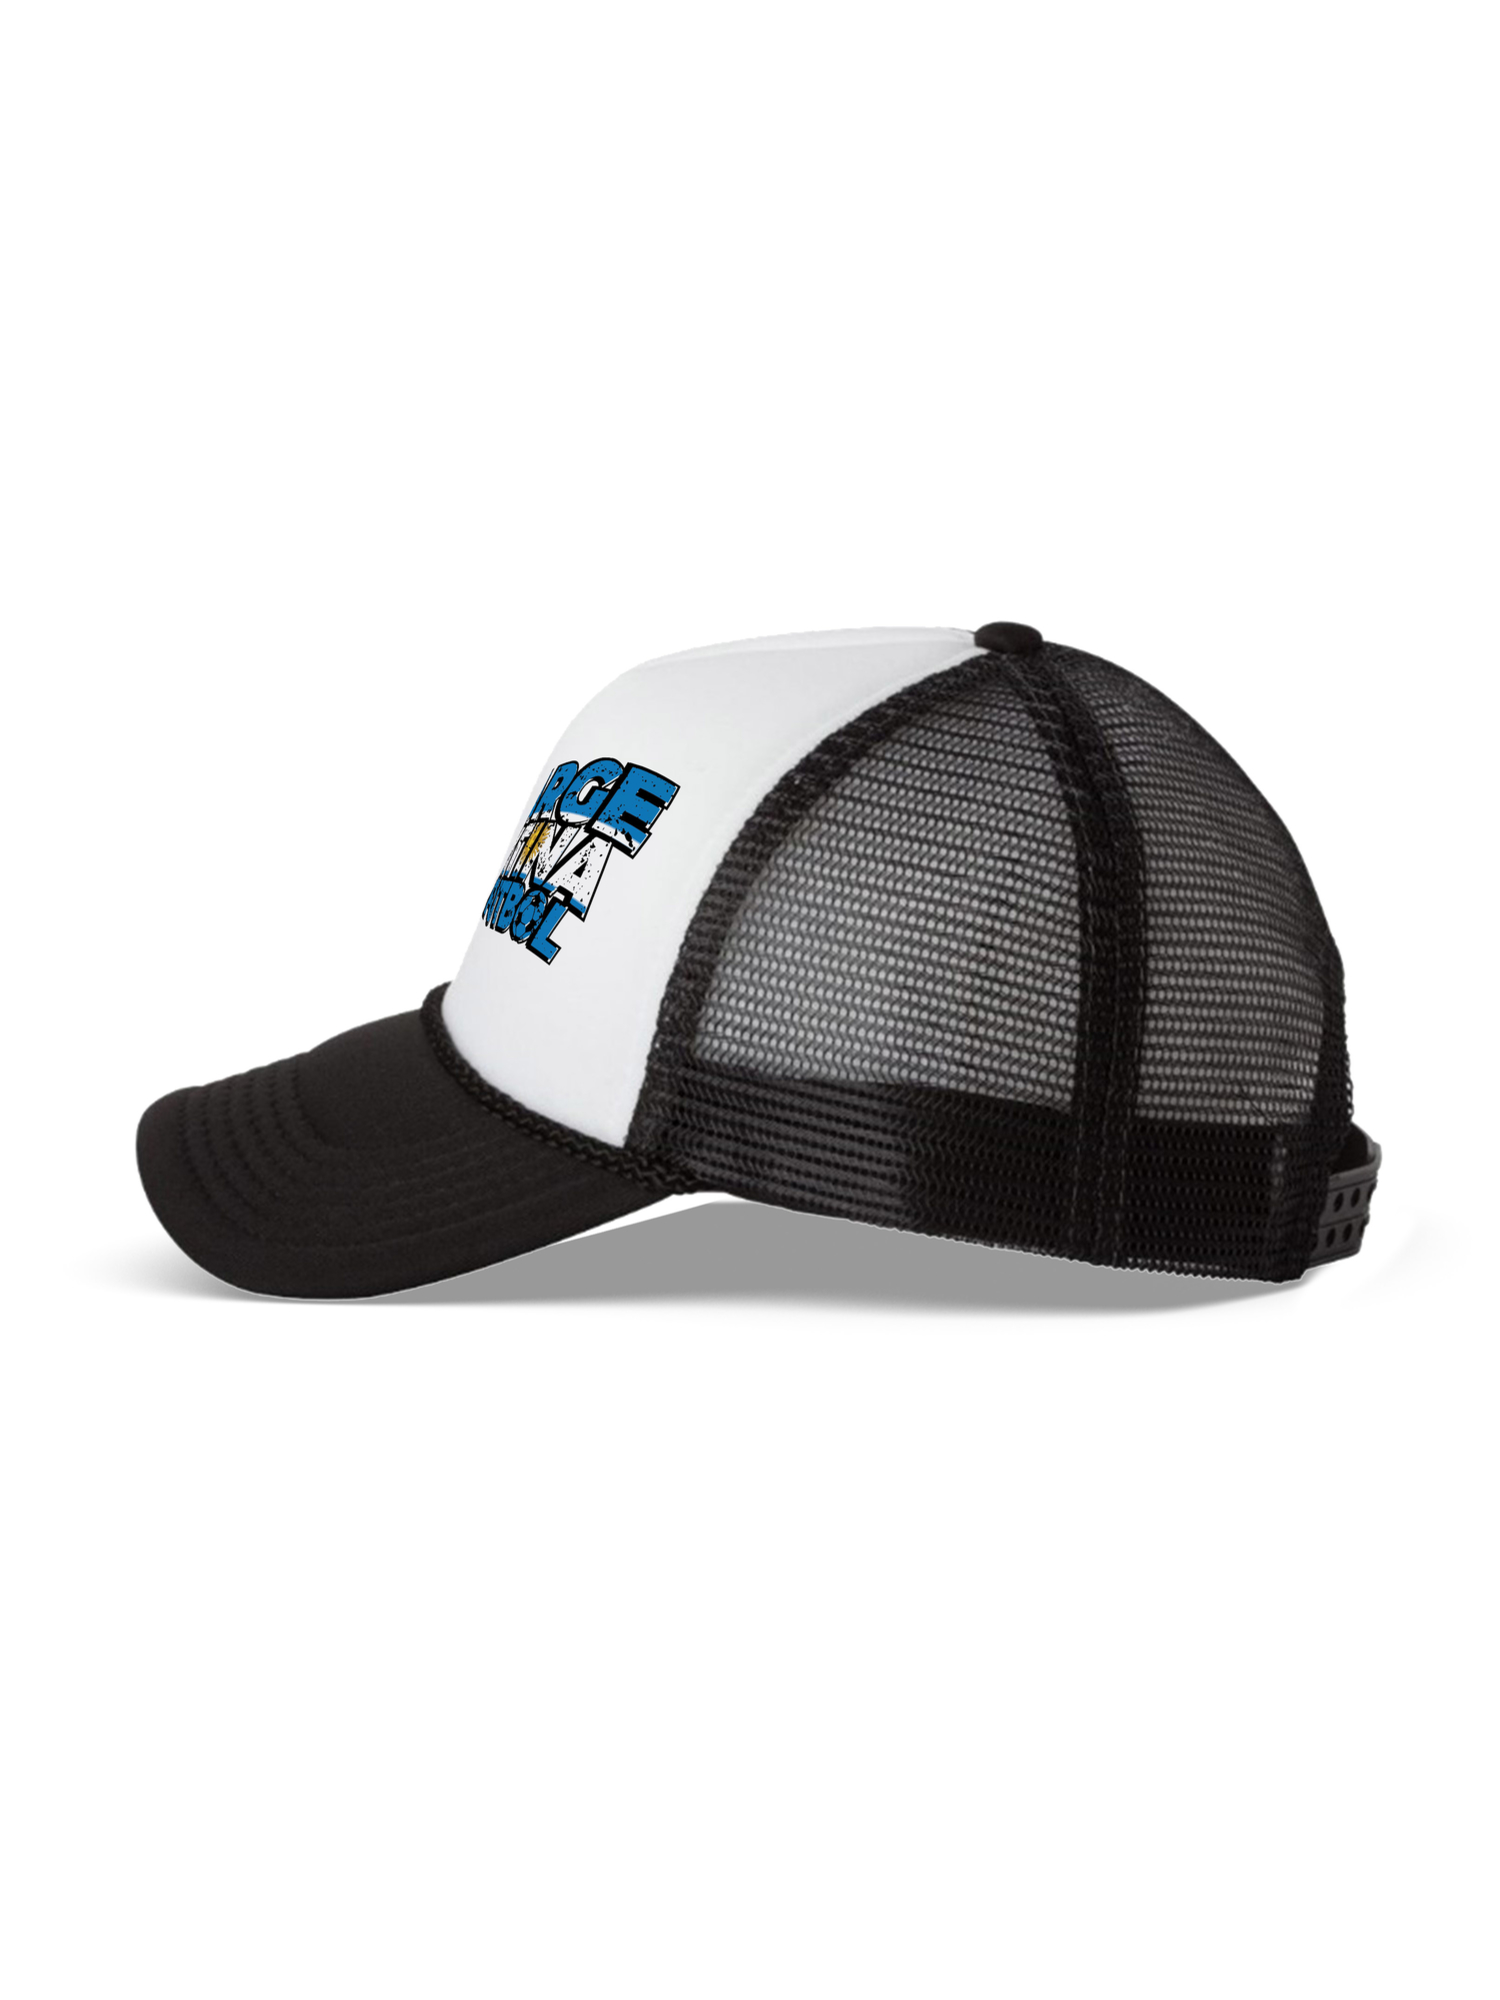 Awkward Styles Argentina Futbol Hat Argentina Trucker Hats for Men and Women Hat Gifts from Argentina Argentinian Soccer Cap Argentinian Hats Unisex Argentina Snapback Hat Argentina 2018 Trucker Hats - image 3 of 6